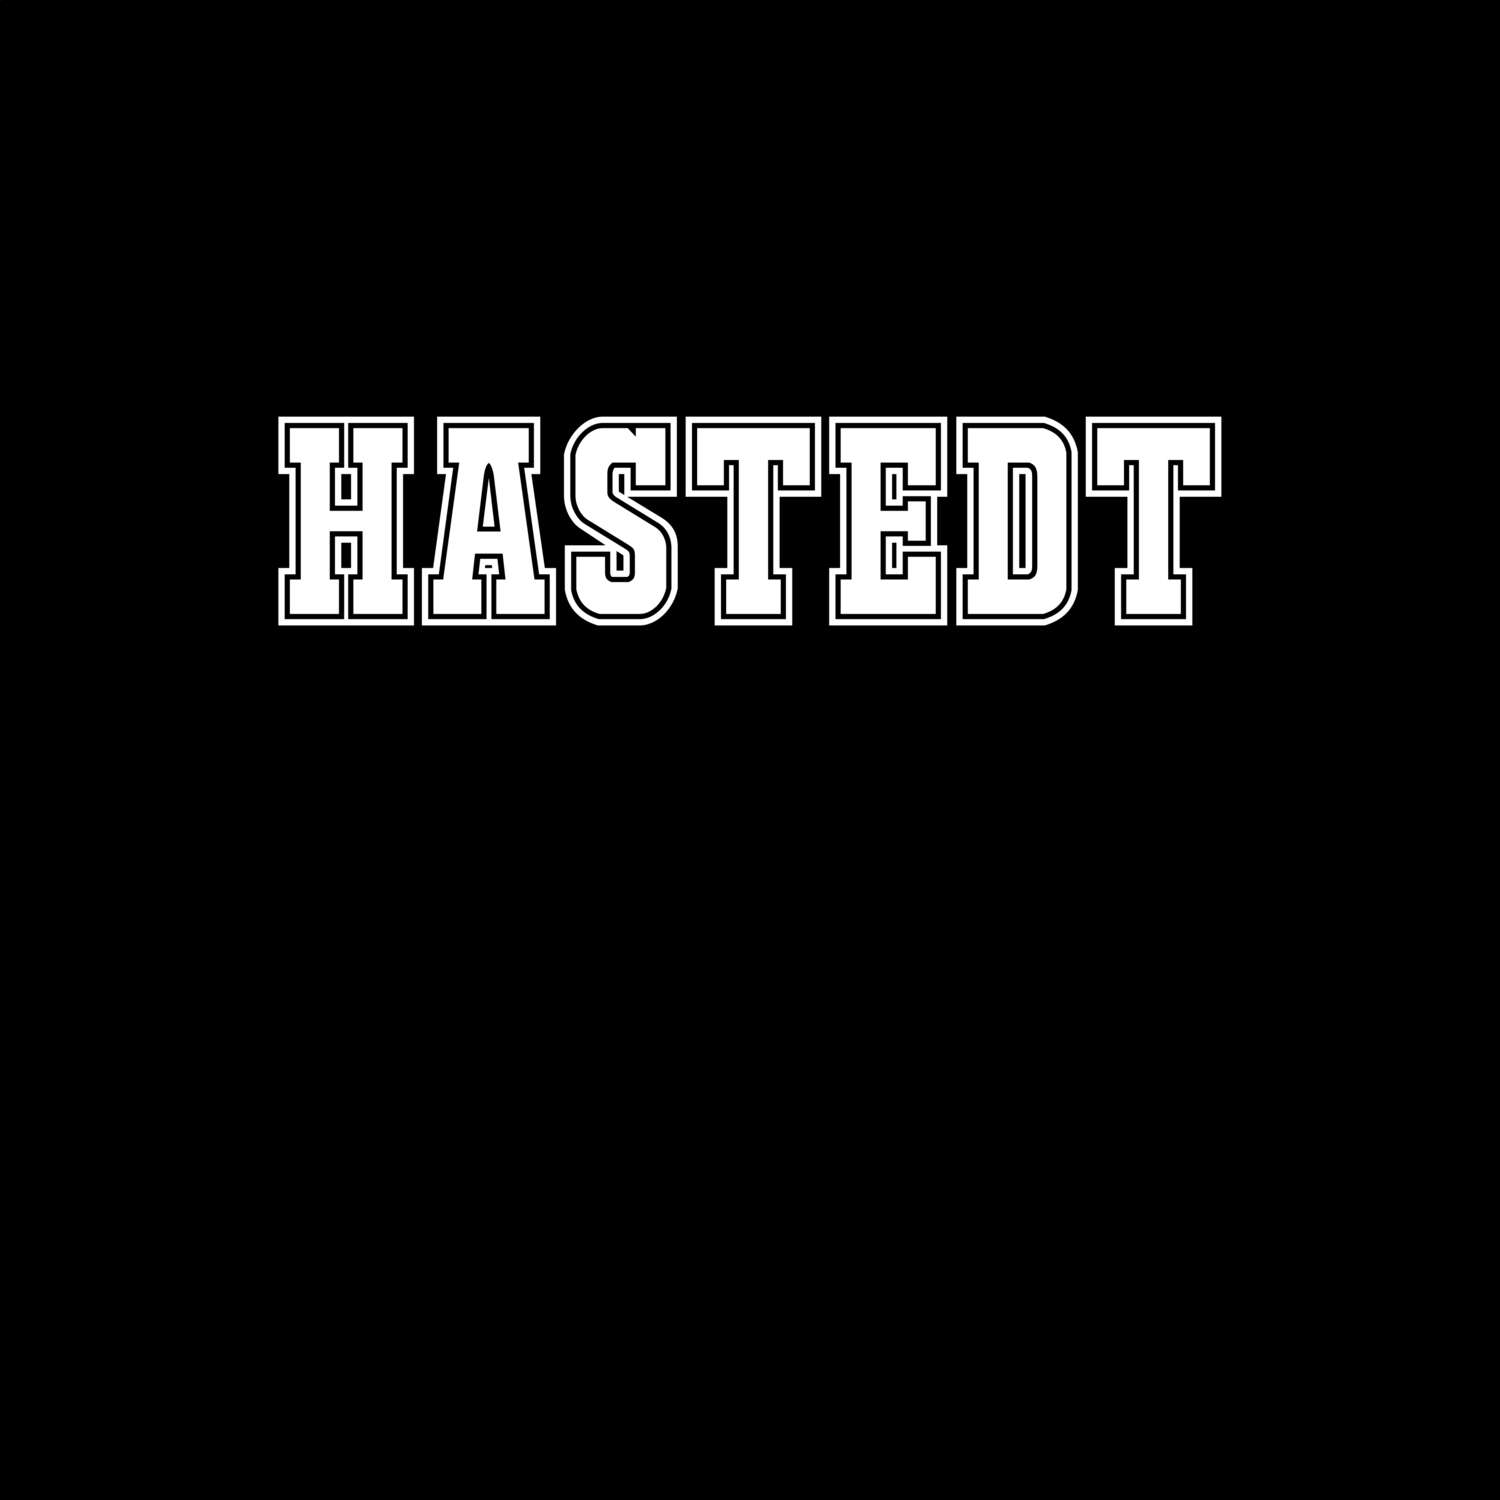 Hastedt T-Shirt »Classic«